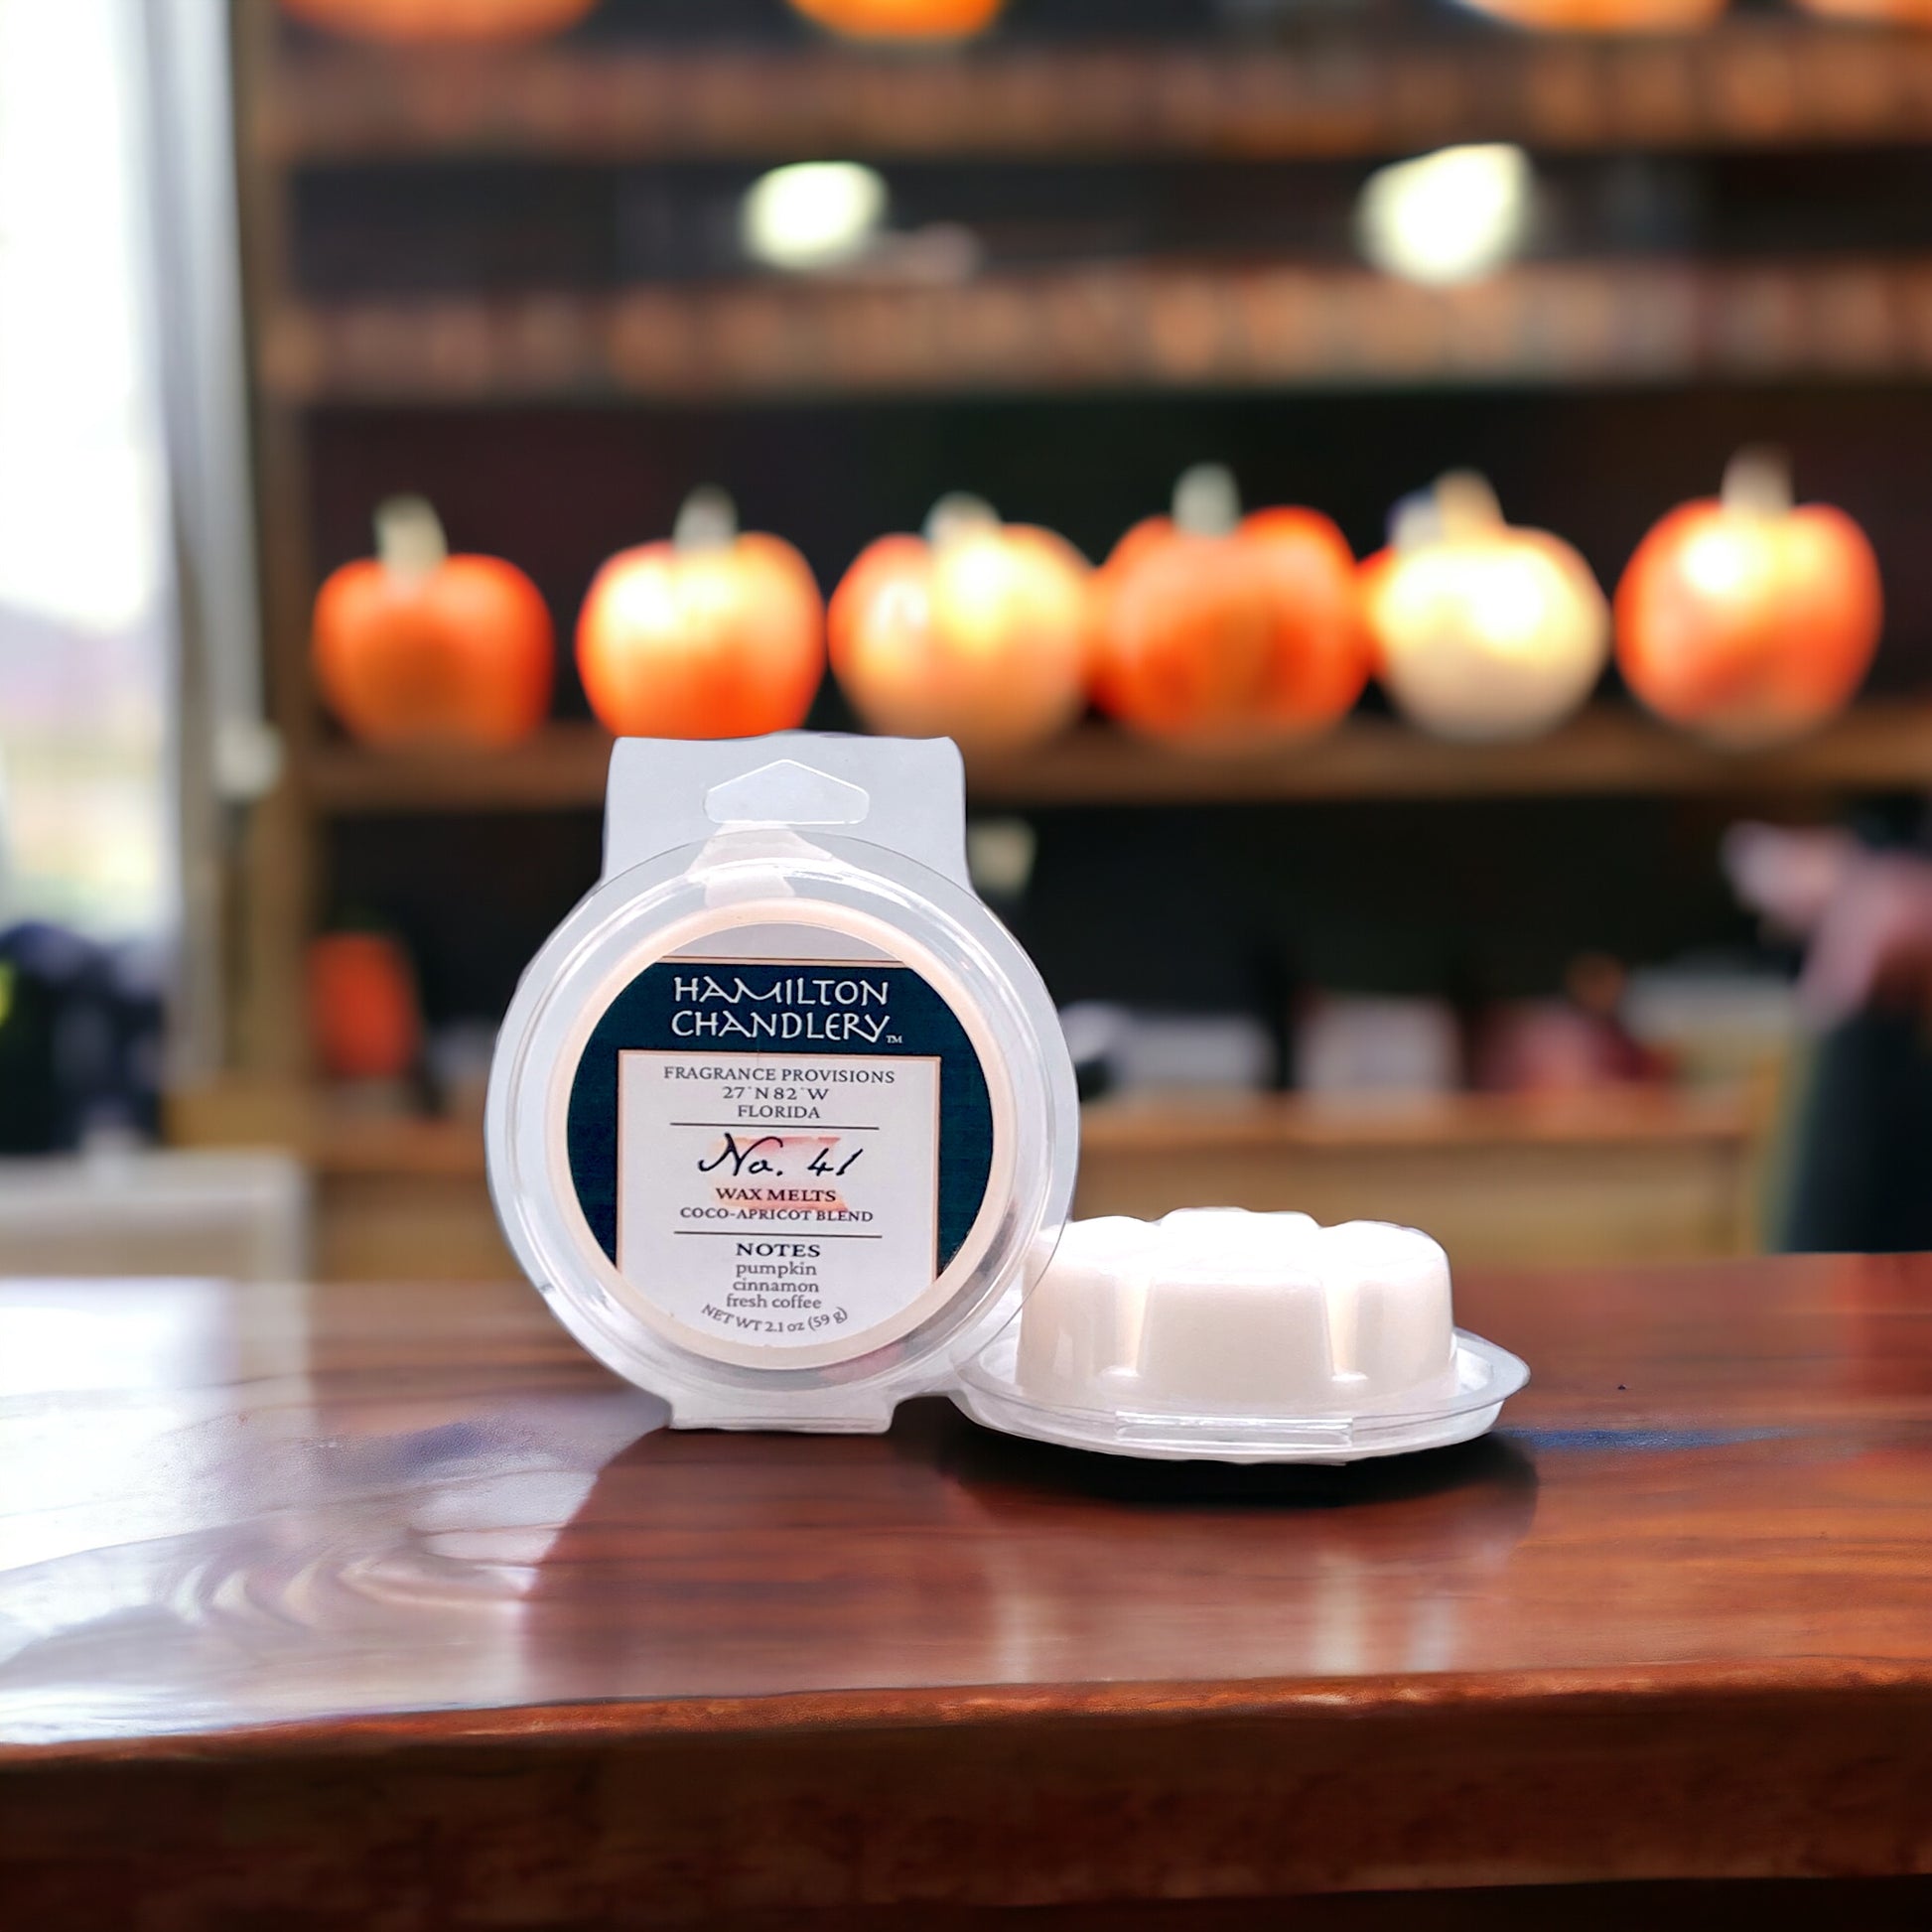 Fragrance No. 41 Wax Melts in Coffeeshop with Pumpkins in Background | Hamilton Chandlery